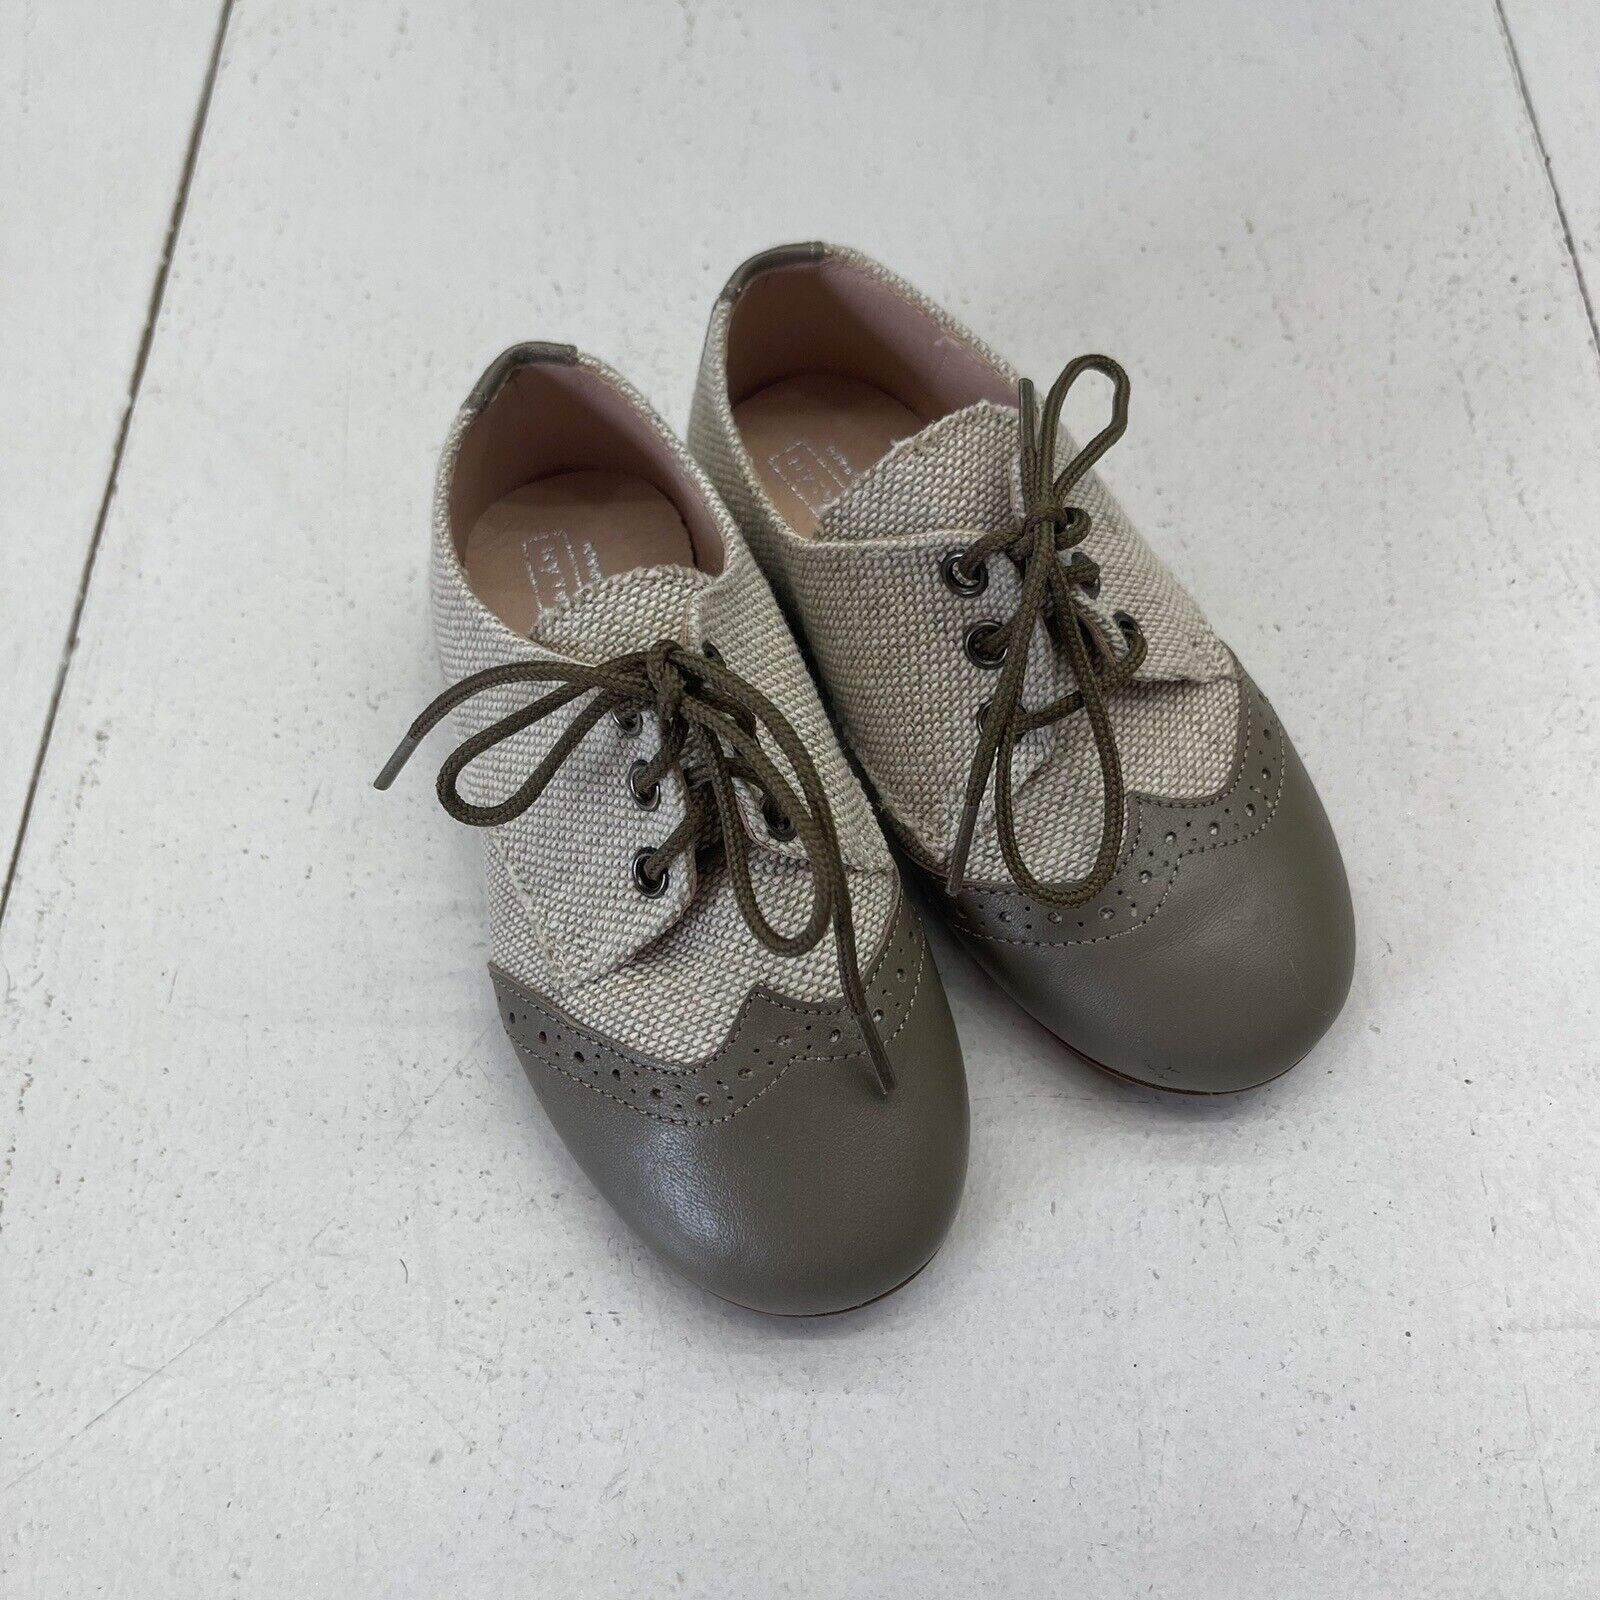 Maria Catalan Taupe Linen Lace Oxford Shoes Kids Size 23 New Without Box